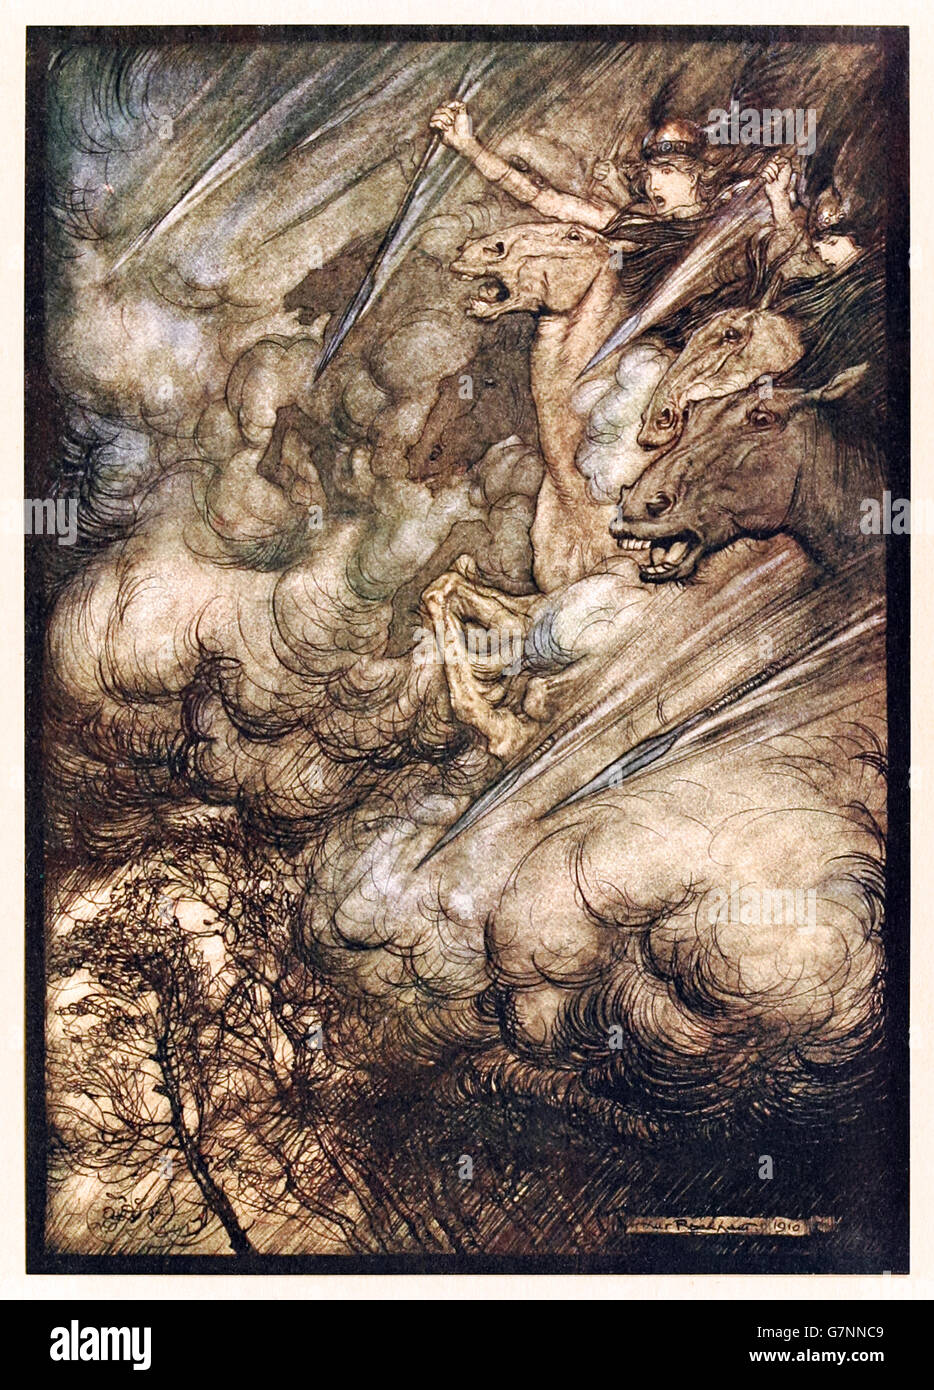 “The Ride of the Valkyries” from ‘The Rhinegold & the Valkyrie’ illustrated by Arthur Rackham (1867-1939), published in 1910. Stock Photo